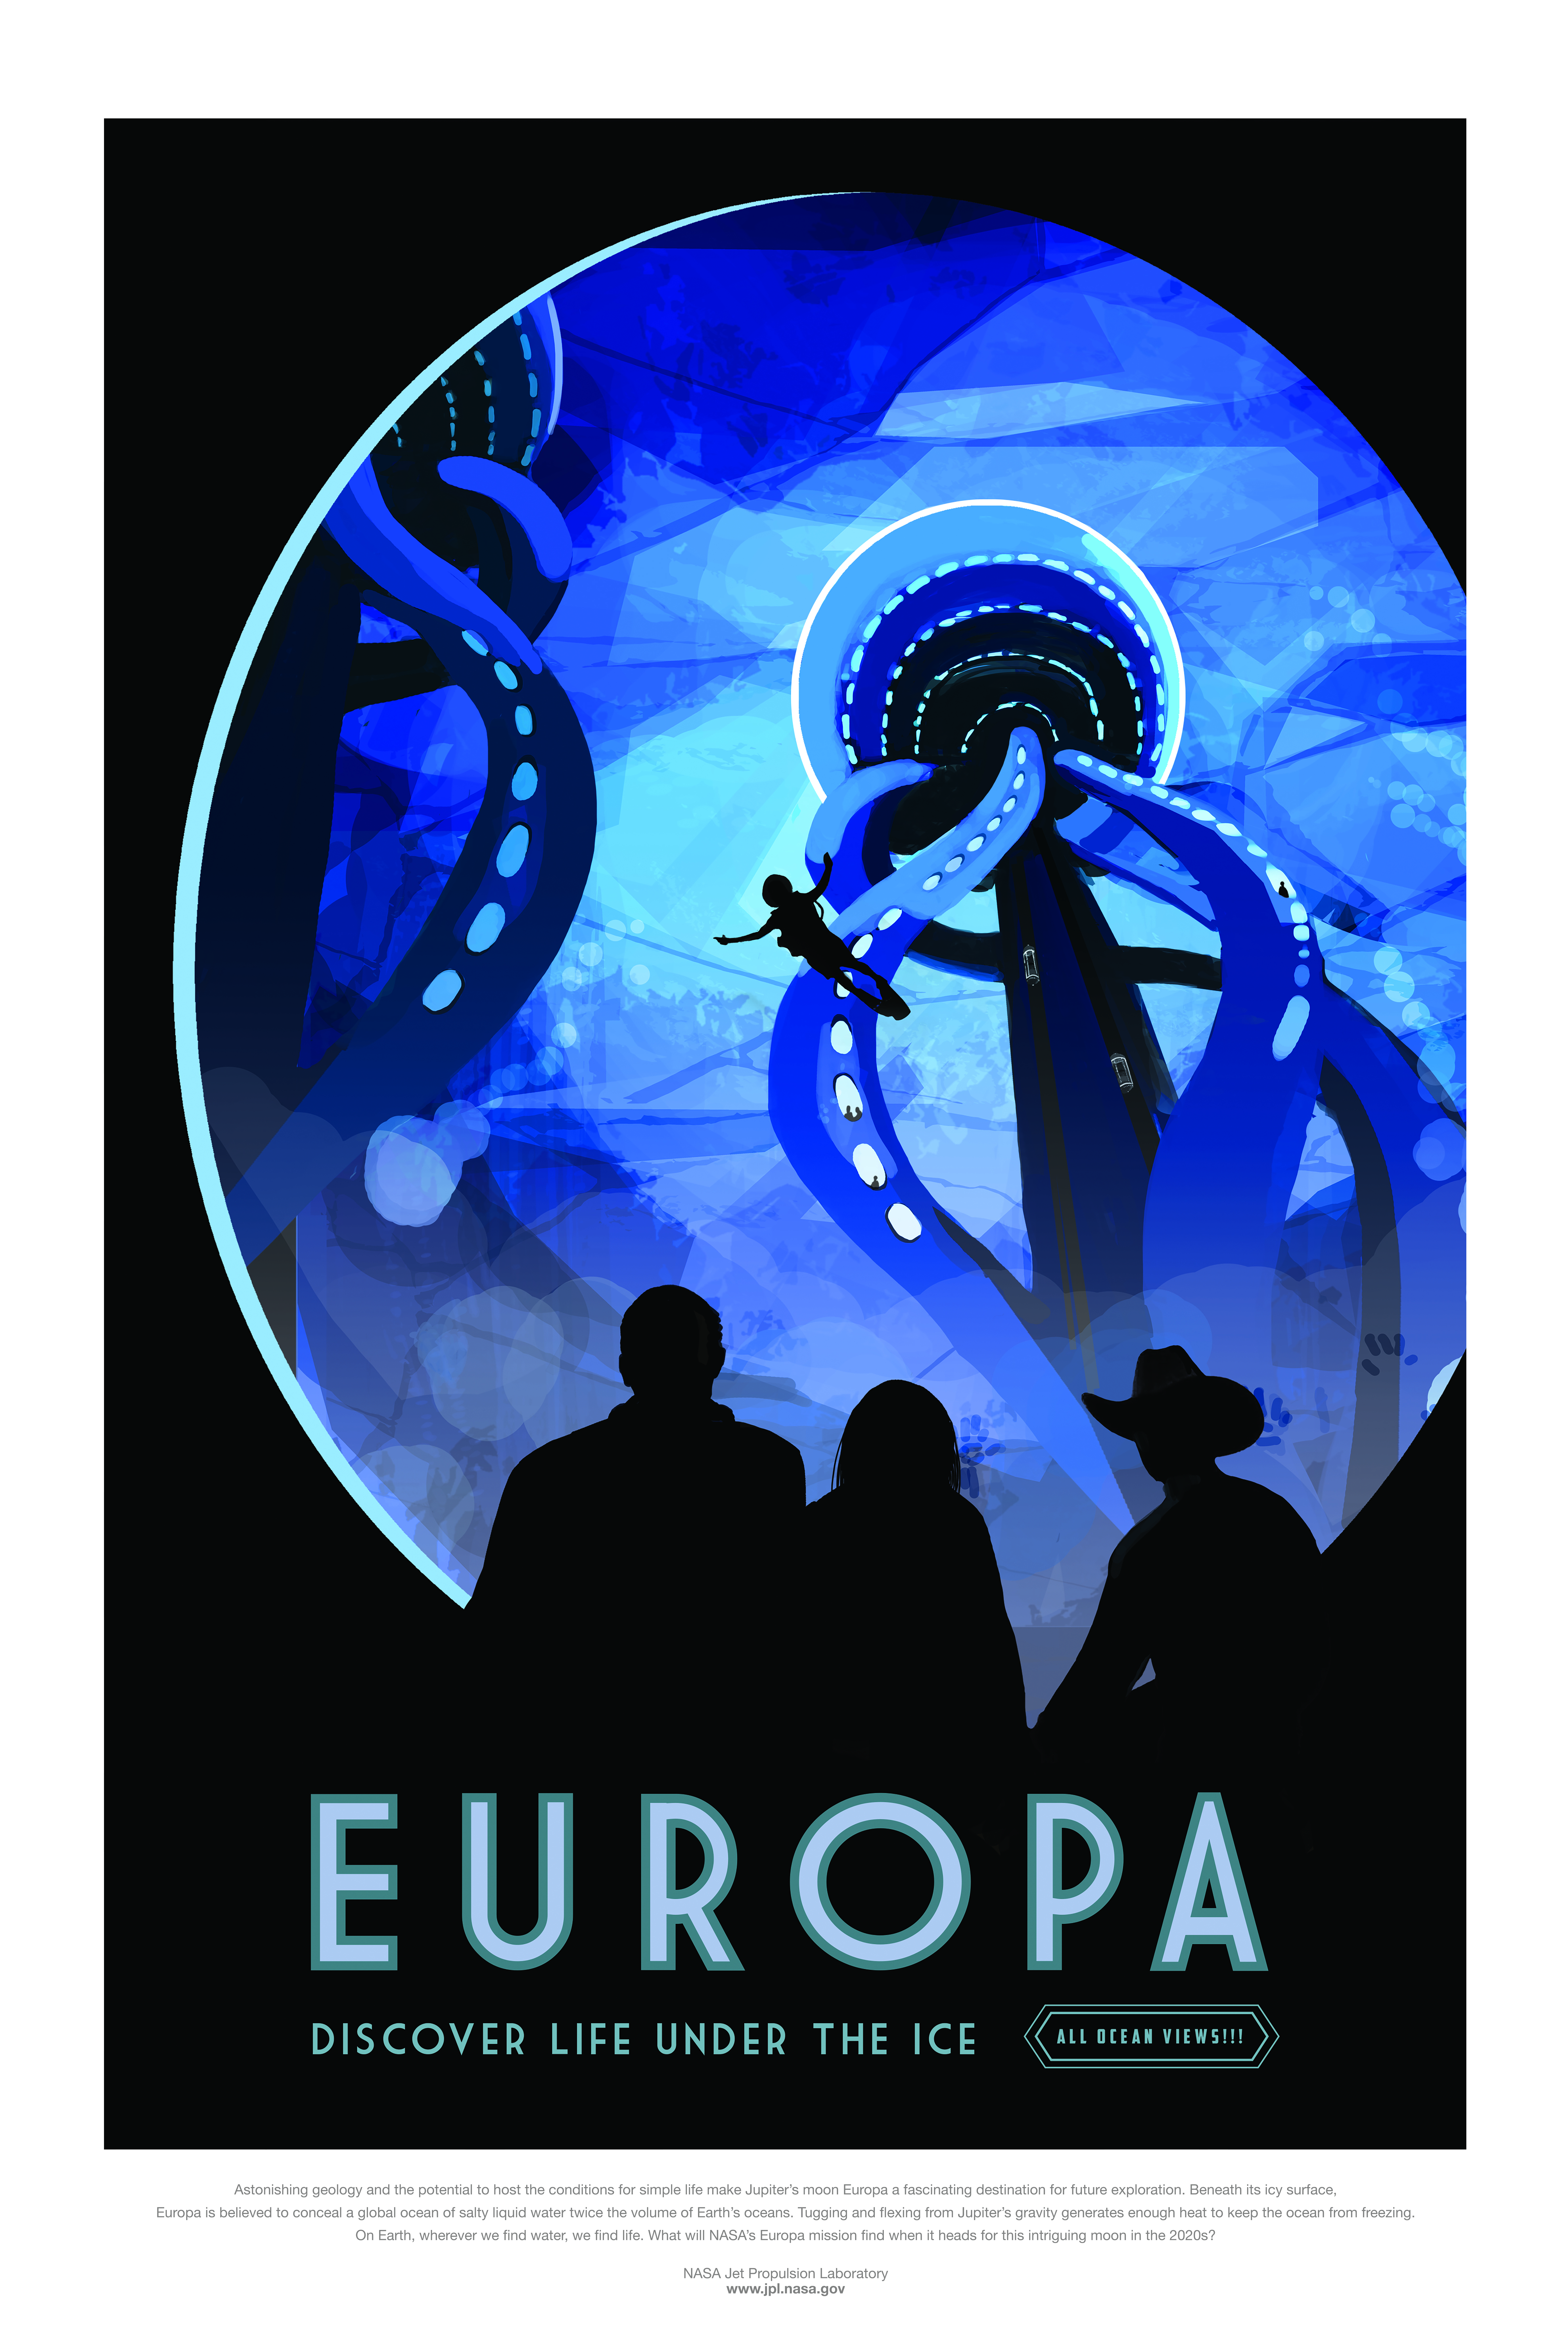 Colorful travel poster showing tourists looking up through a futuristic city in the ocean on icy moon Europa.